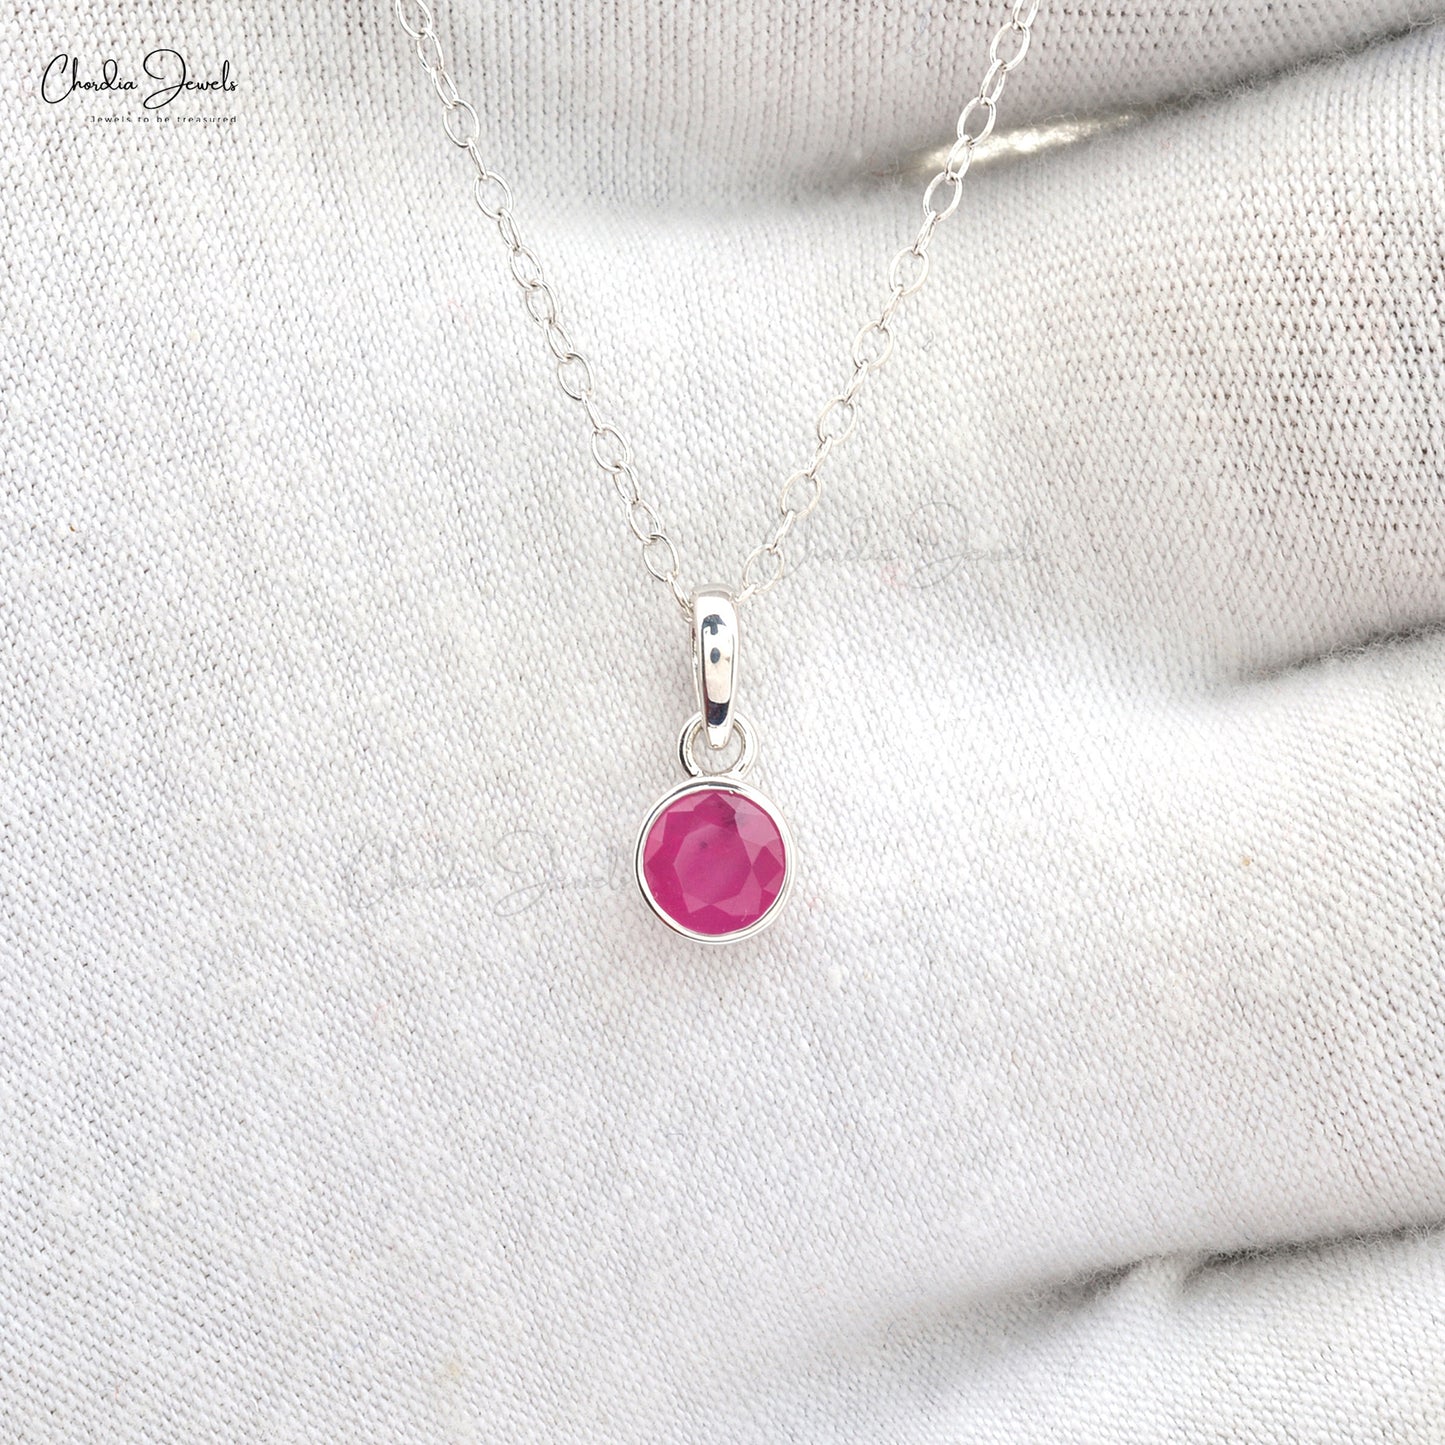 Round Brilliant Cut Bezel Set Genuine Red Ruby Solitaire Pendant Necklace in Real 14k White Gold Bridesmaid Gift